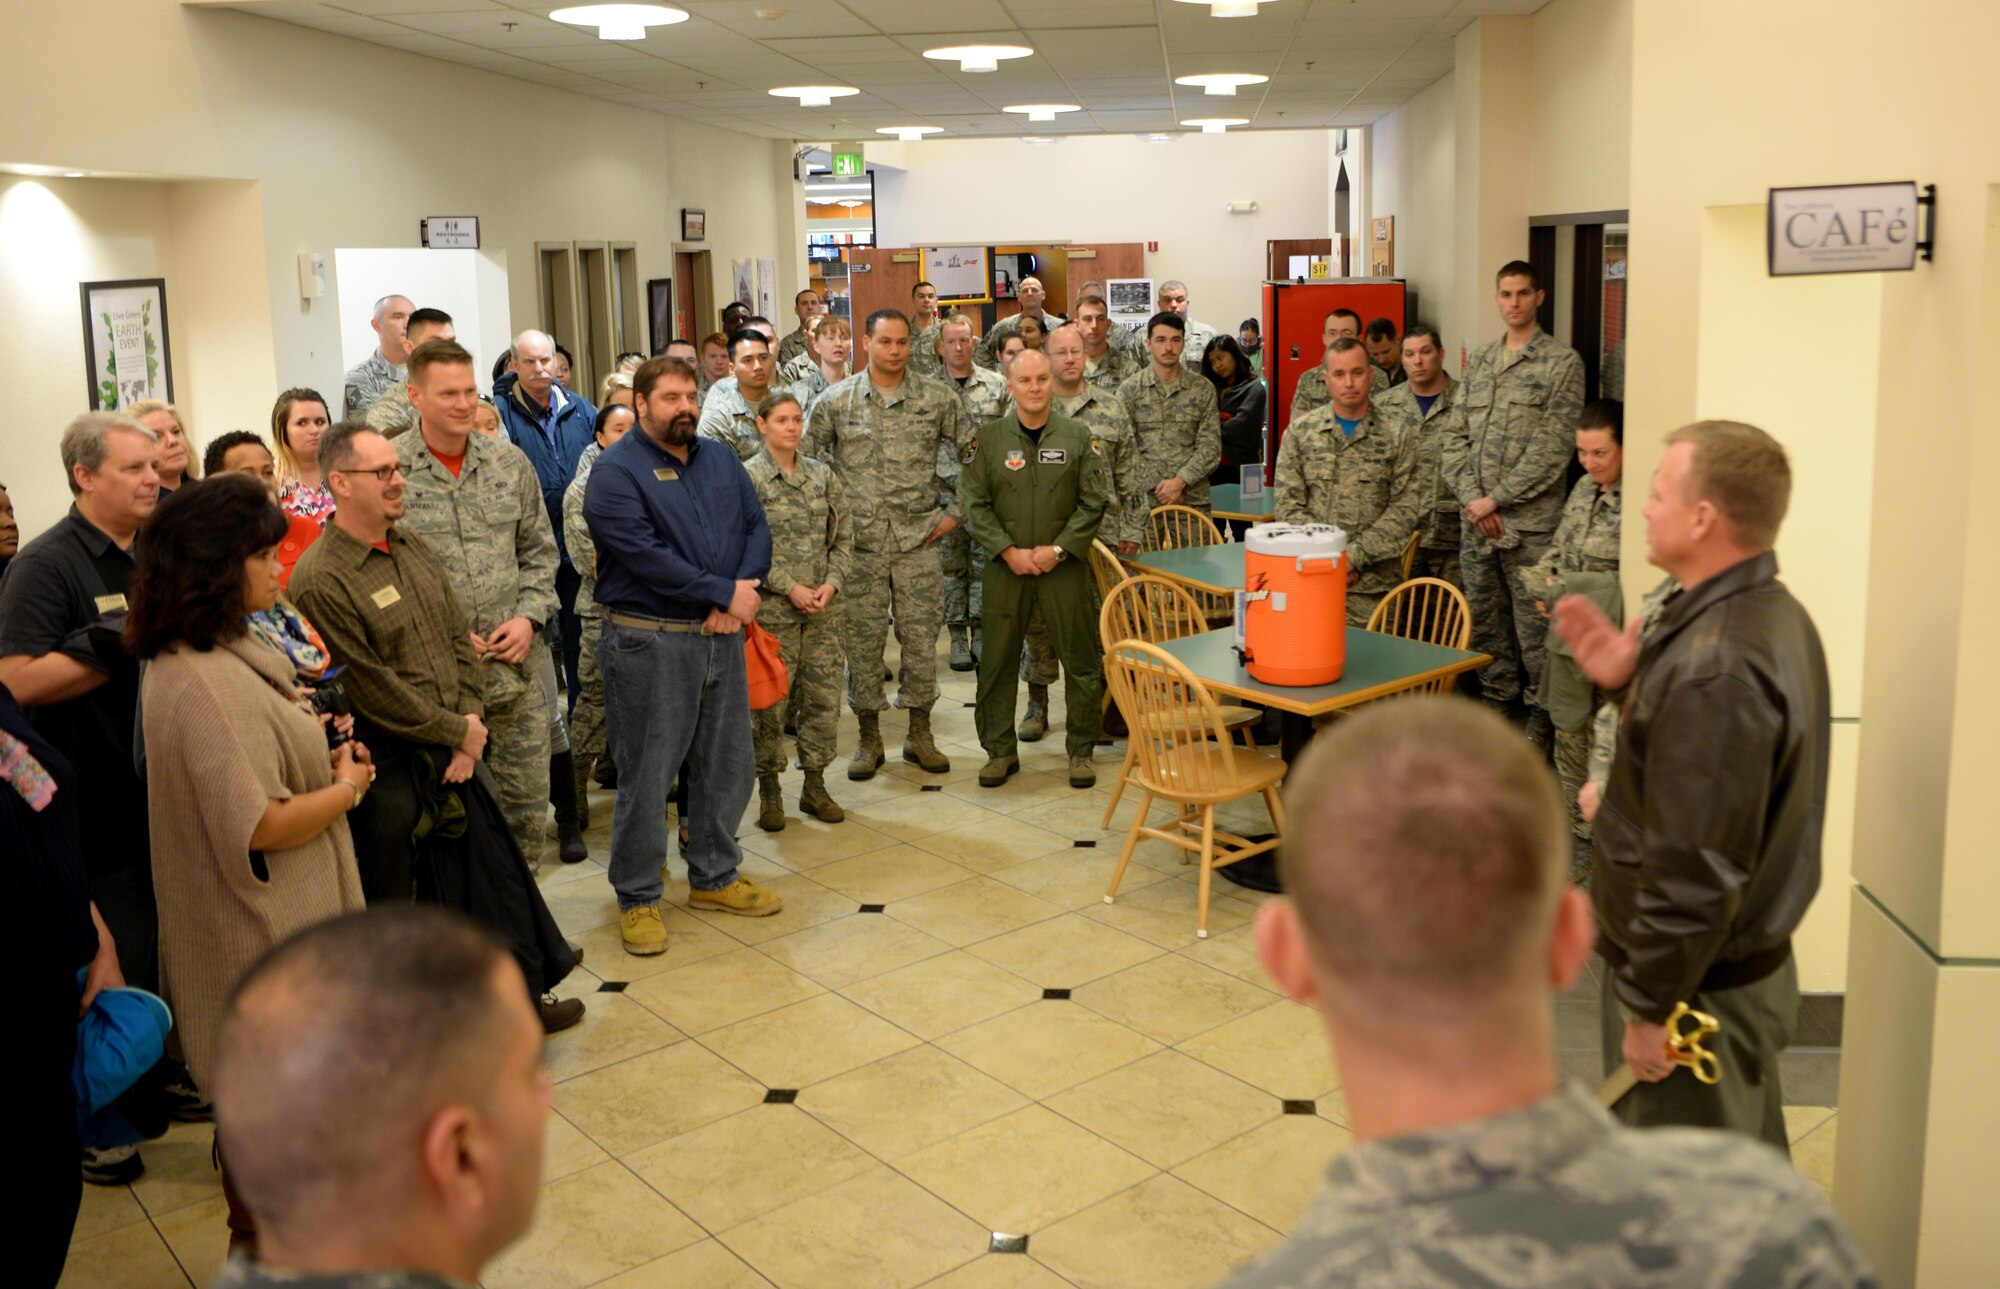 Col. Christopher Stricklin (right), 9th Reconnaissance Wing vice commander address an audience in attendance for the opening of the California CAFé, at the Beale Community Activity Center, Feb. 3, 2017, at Beale Air Force Base, California. The intent of the CAFé is to aid in the improvement of social fitness at Beale. (U.S. Air Force photo/ Staff Sgt. Bobby Cummings)

